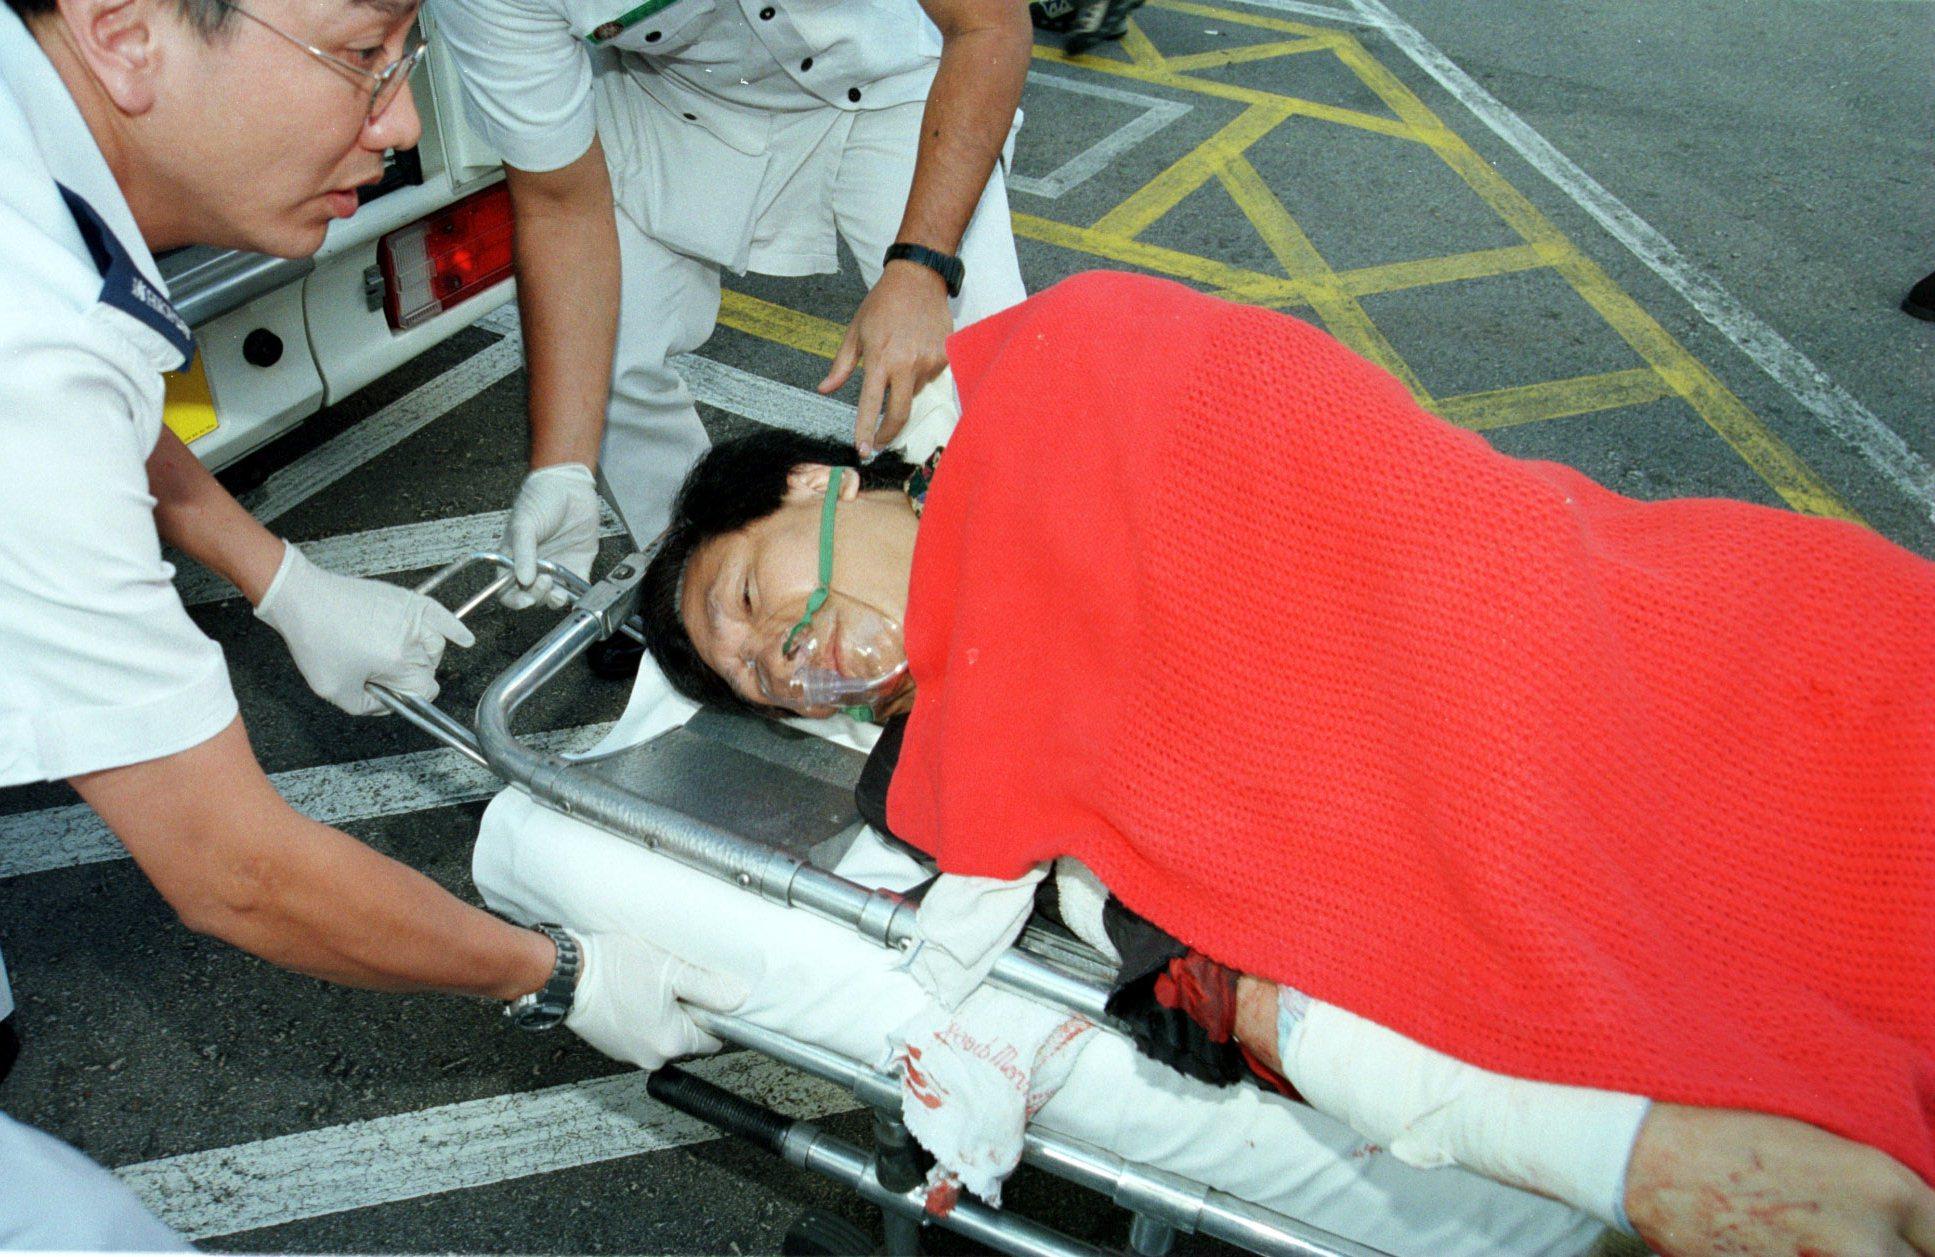 Radio personality Albert Cheng King-hon is taken to hospital after he was severely wounded in a knife attack outside the Commercial Radio building in 1998. Photo: SCMP